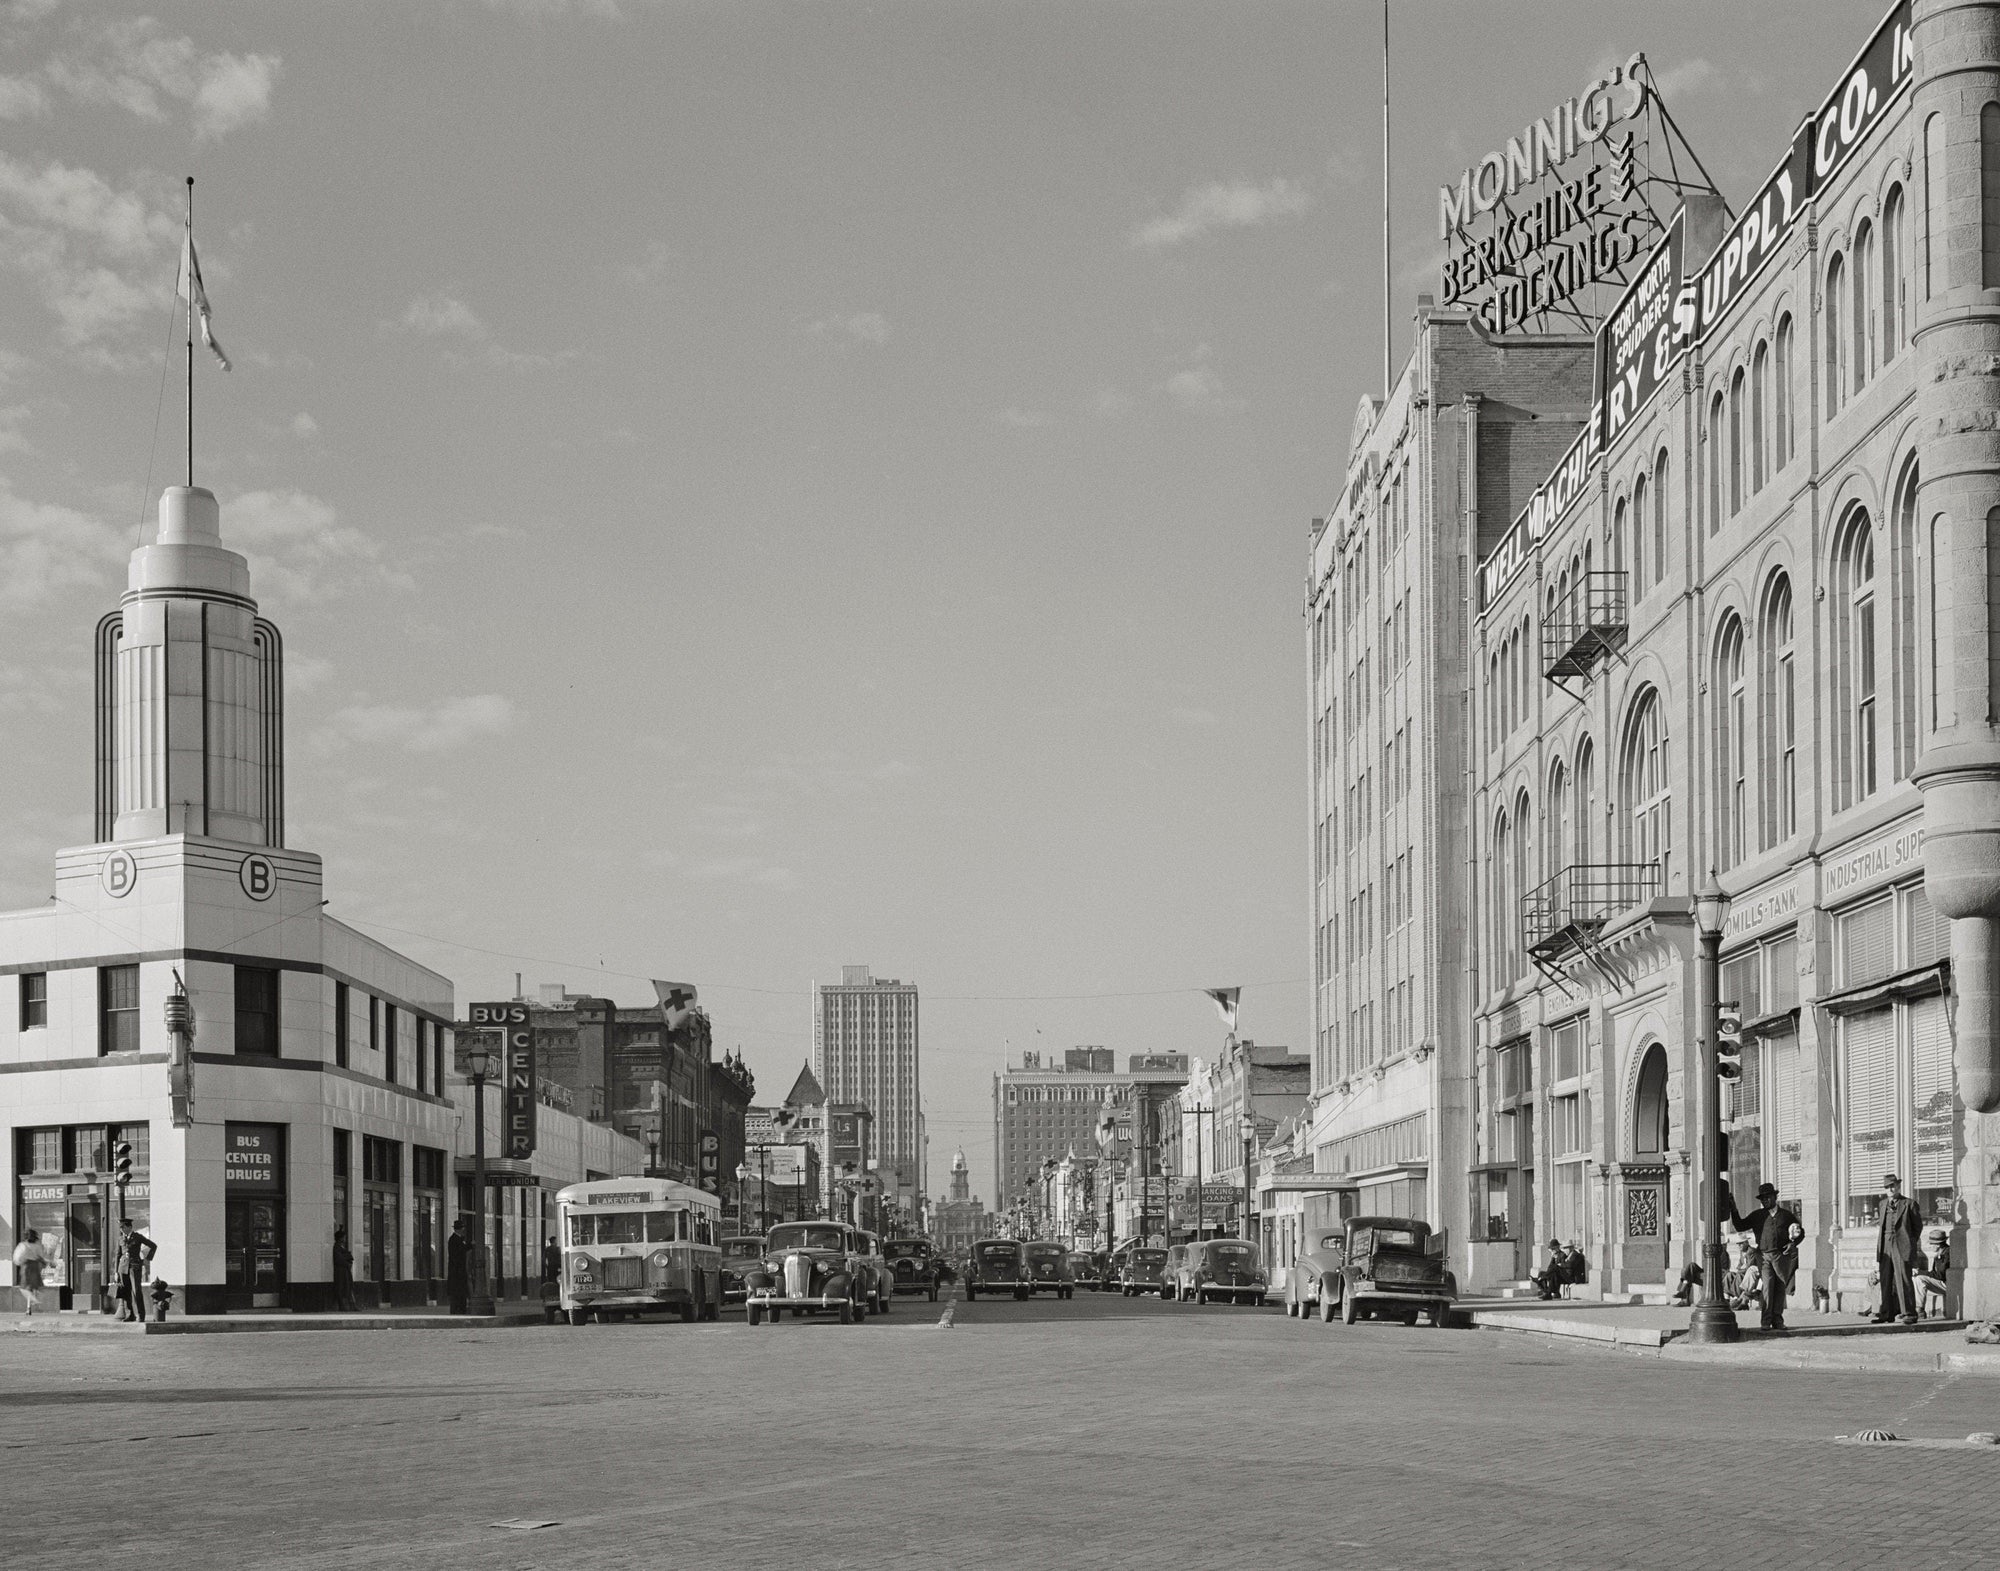 Old Fort Worth Texas, Main Street, 1942 Historical Pix